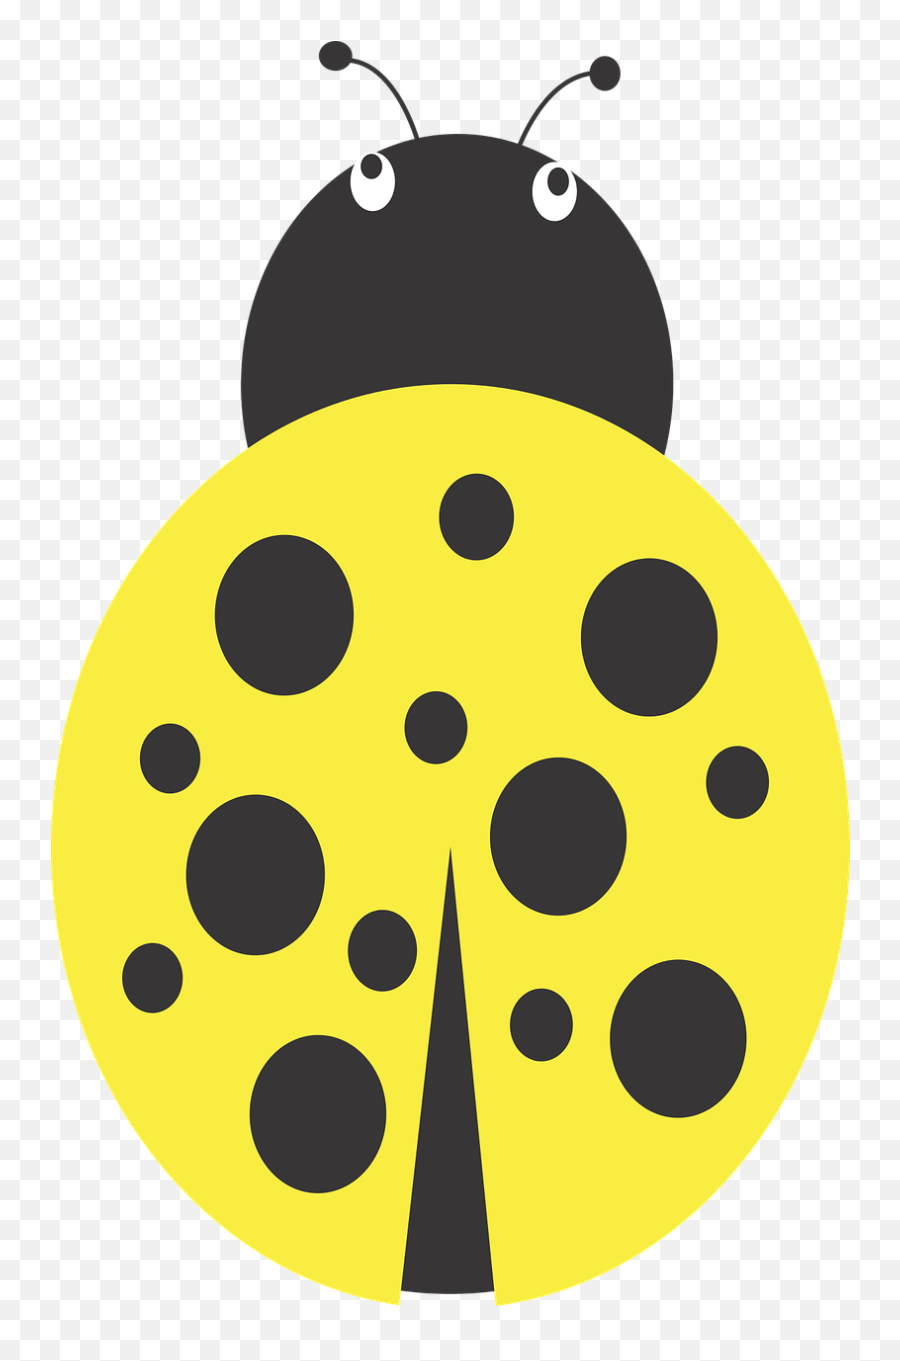 Download Hd Yellow Bug For Free - Beetle Marktbrunnen Png,Beetle Png